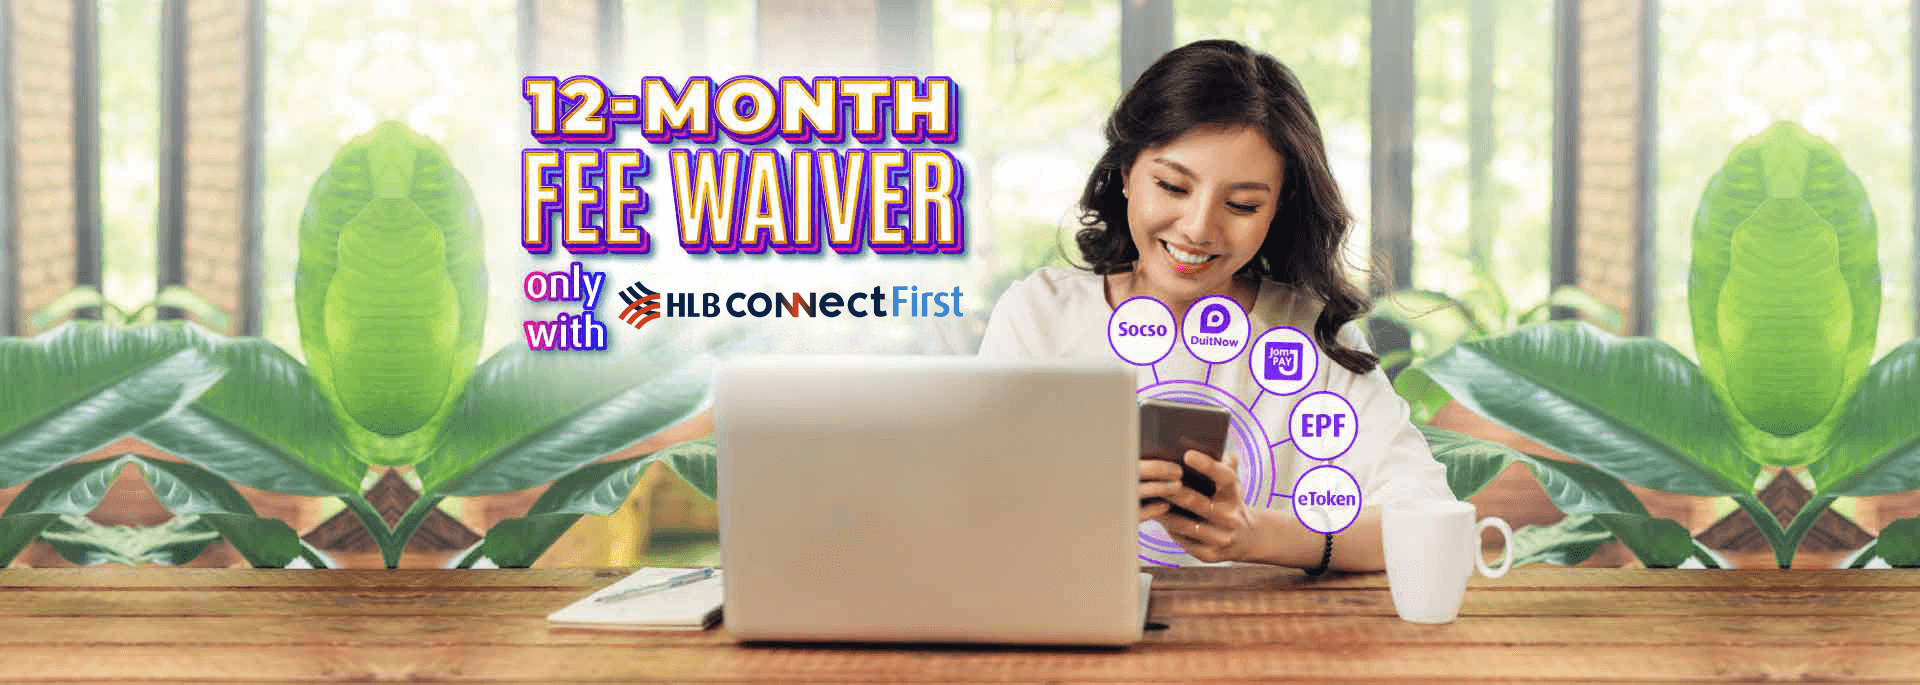 12-month fee waiver only with HLB ConnectFirst